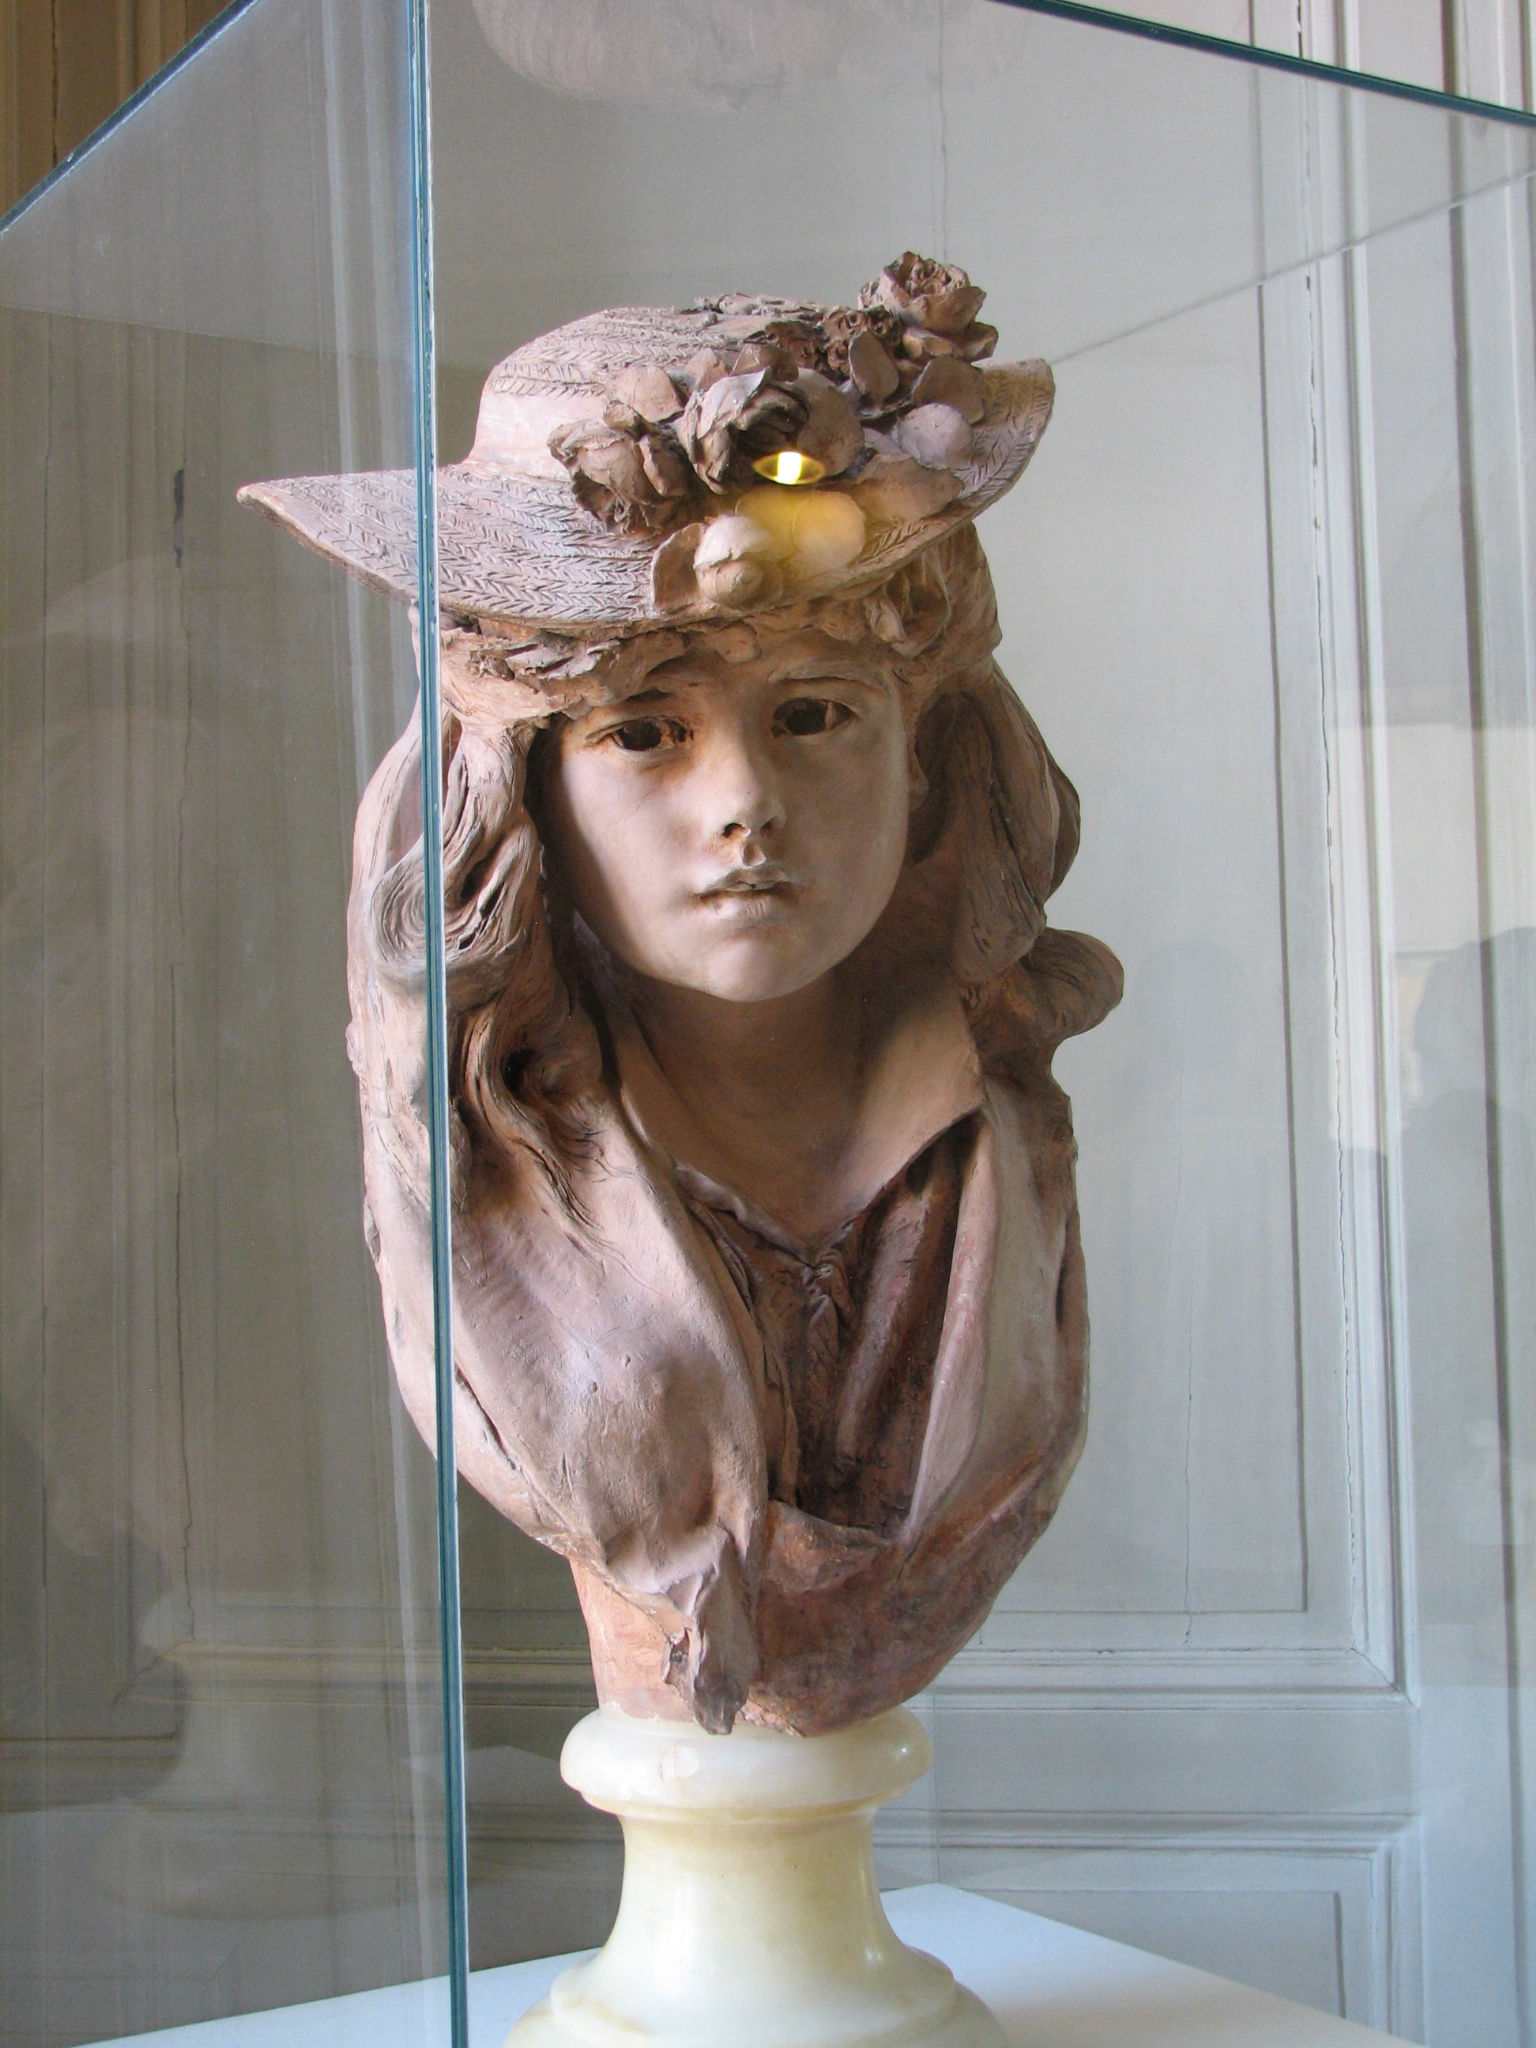 Rodin's girl with a flower hat